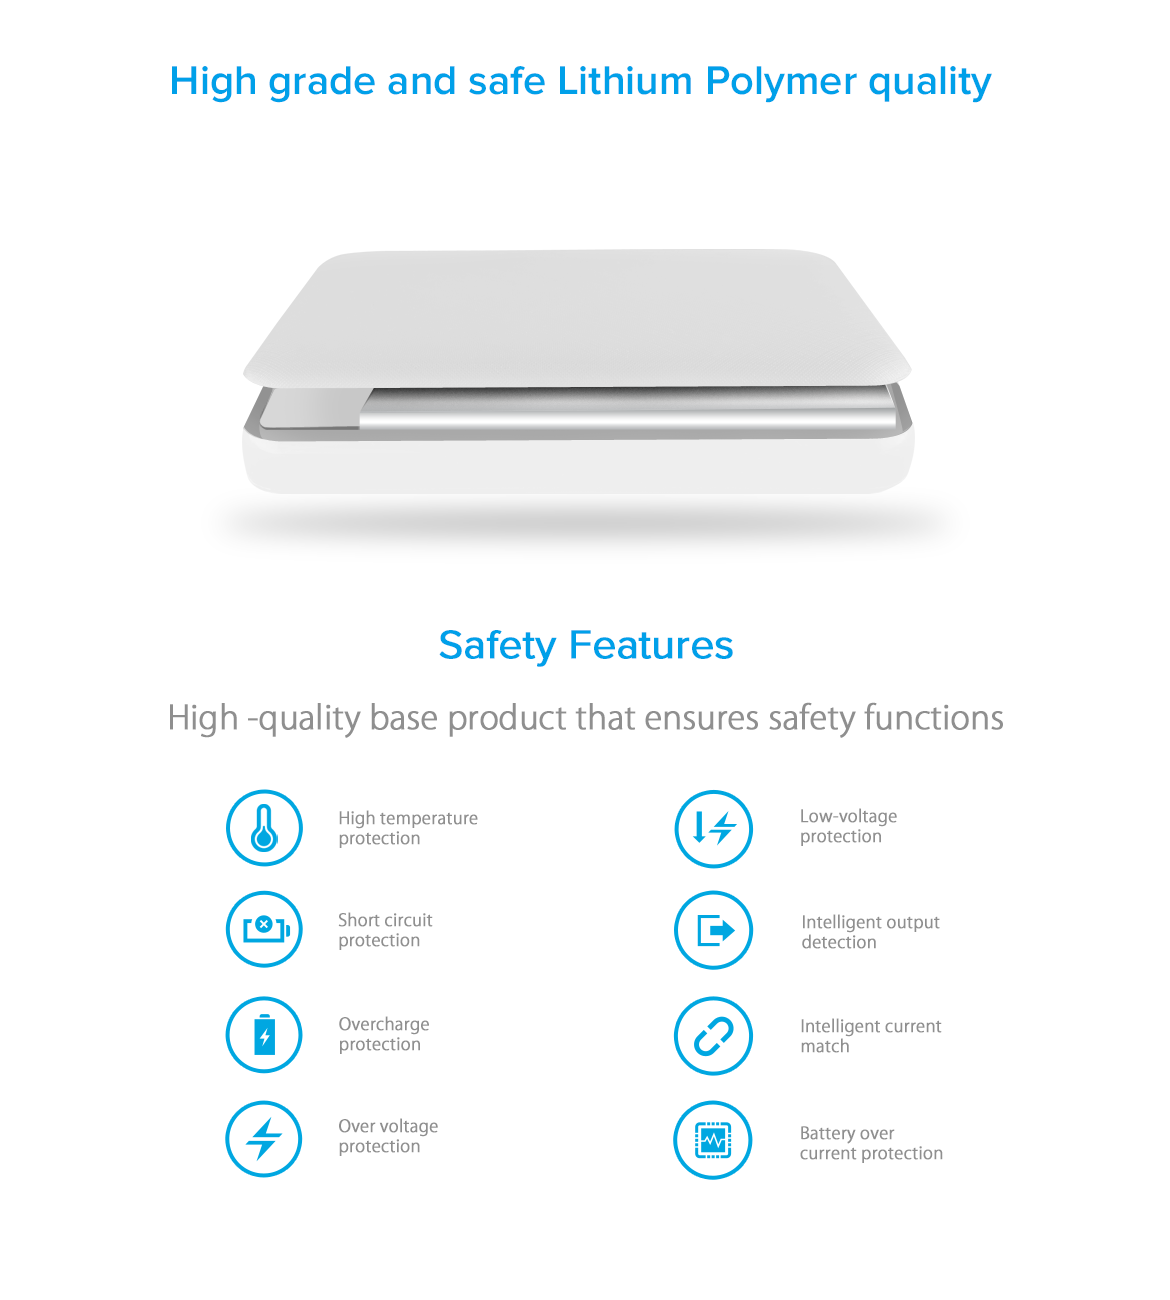 Uses high-quality lithium polymer with high safety